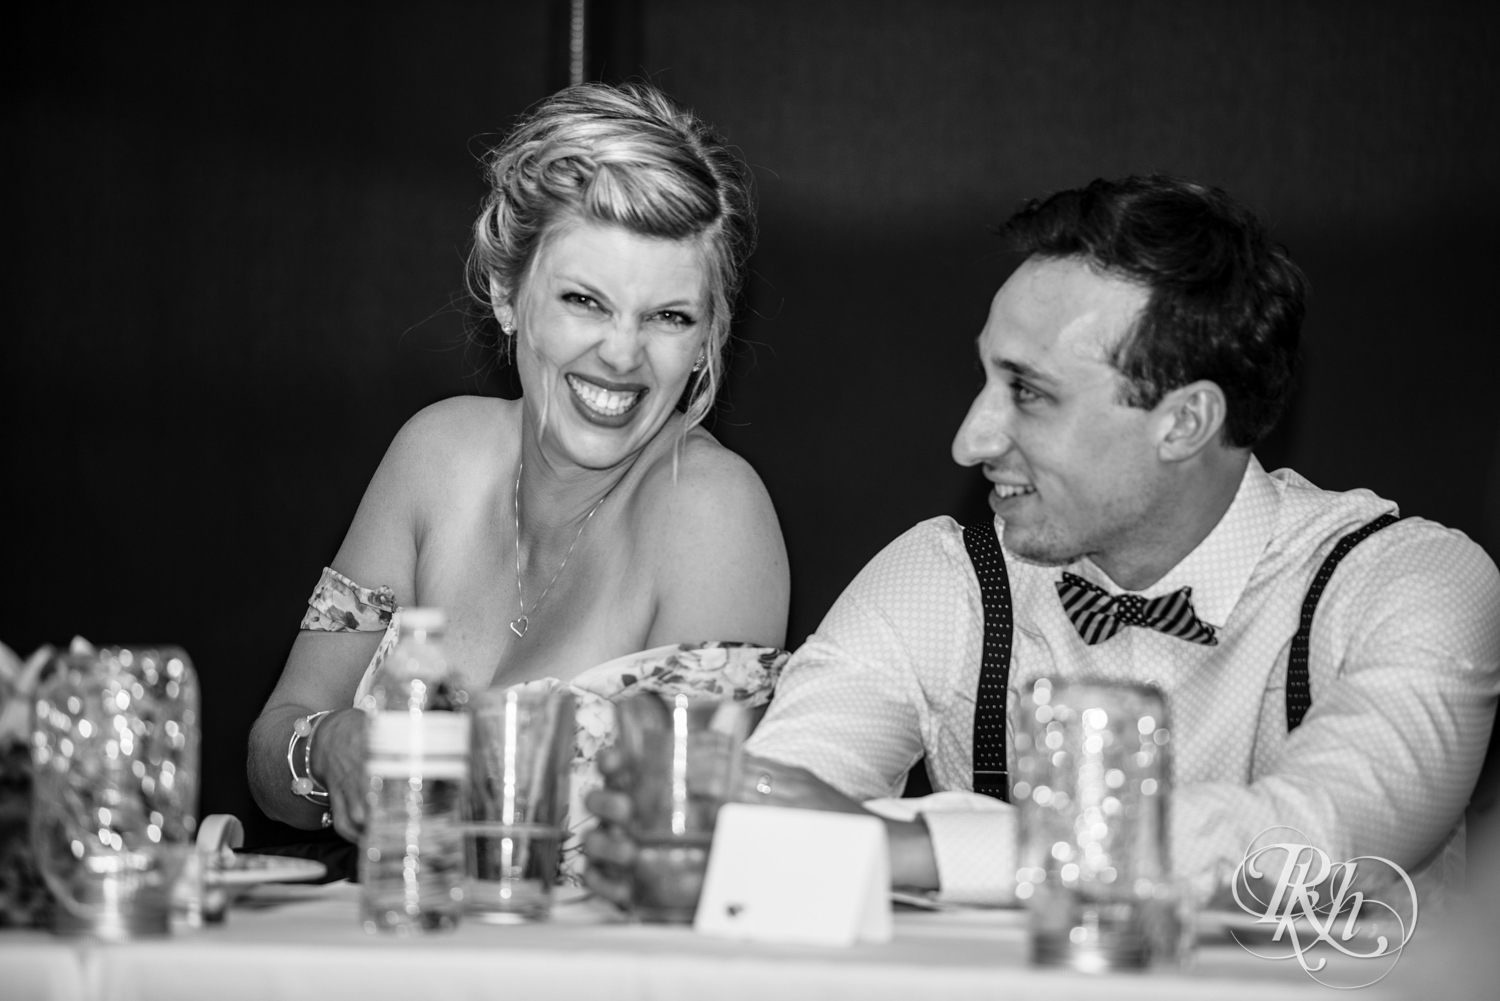 Bride and groom laugh during speeches at wedding reception at Brookview Golf Course in Golden Valley, Minnesota.